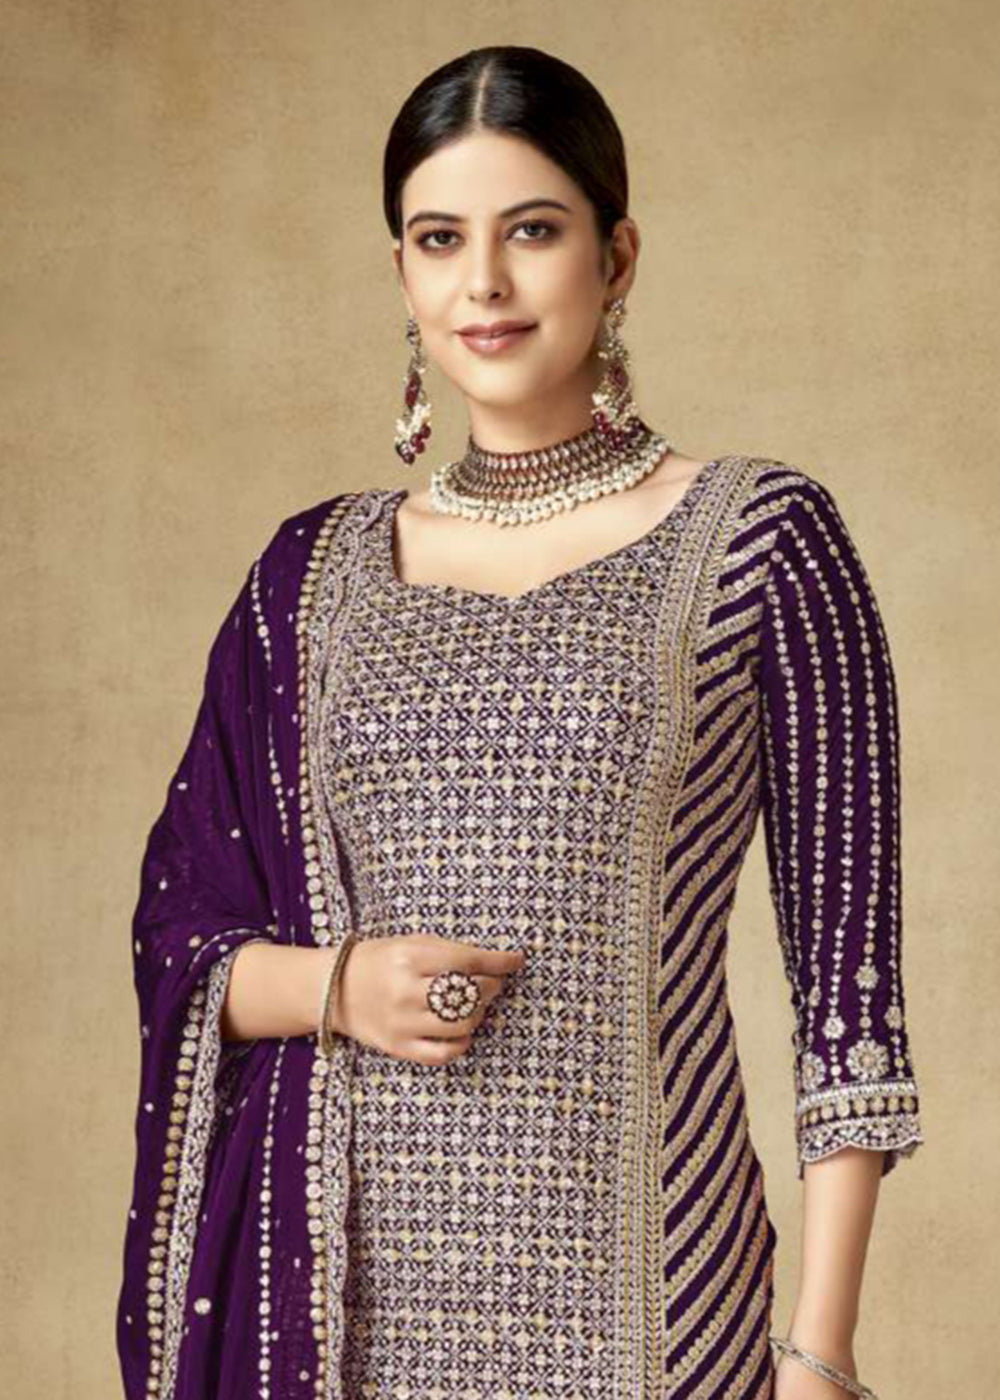 Shop Now Alluring Purple Zari & Sequins Embroidered Gharara Suit Online at Empress Clothing in USA, UK, Canada, Italy & Worldwide.